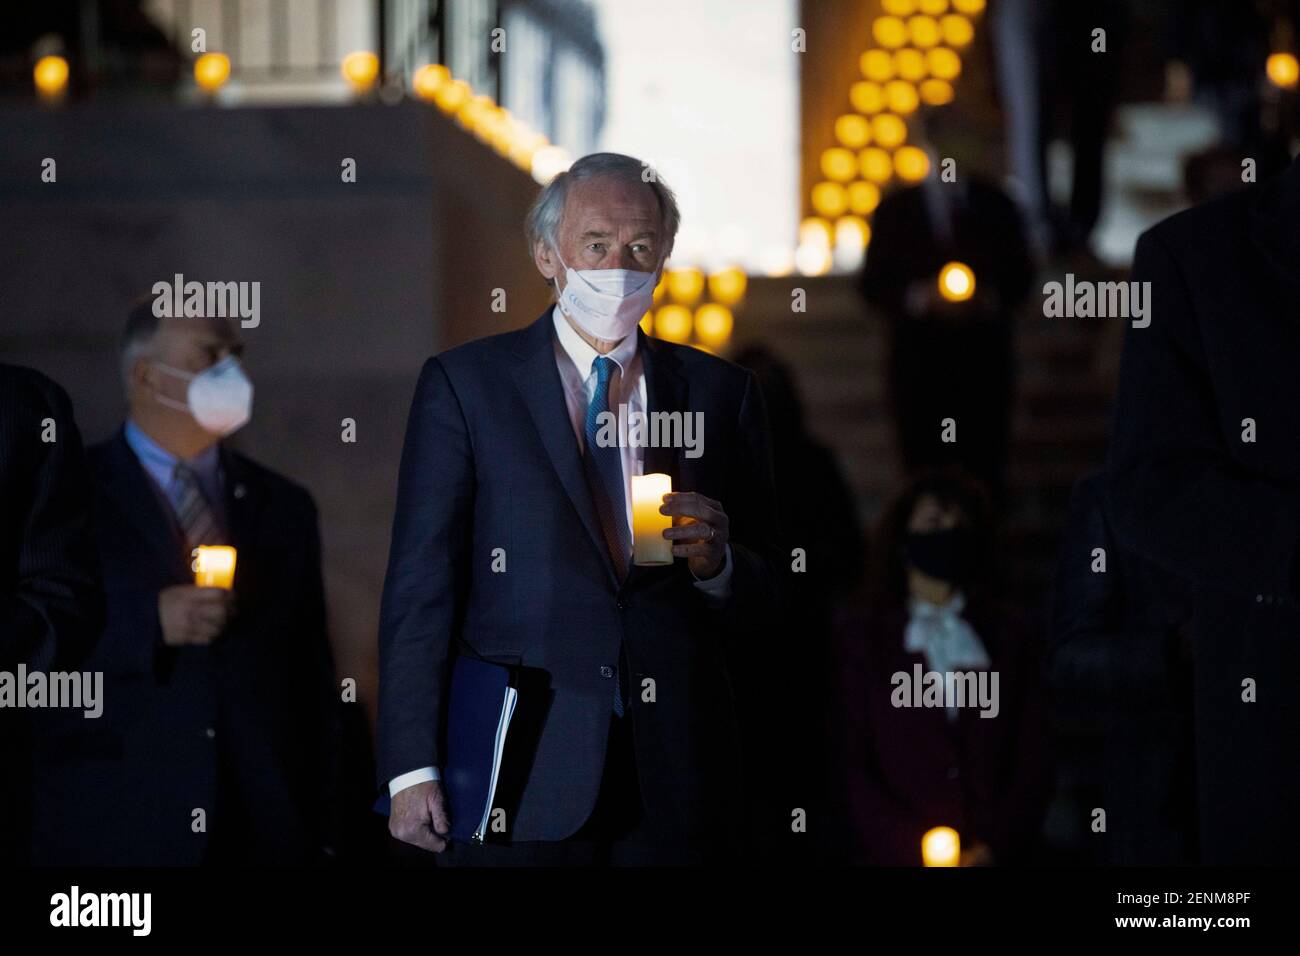 Senator Ed Markey, center, joins members of Congress during a candlelight vigil and moment of silence for the over 500,000 Americans who have died from COVID-19 outside the U.S. Capitol February 23, 2021 in Washington, D.C. Stock Photo